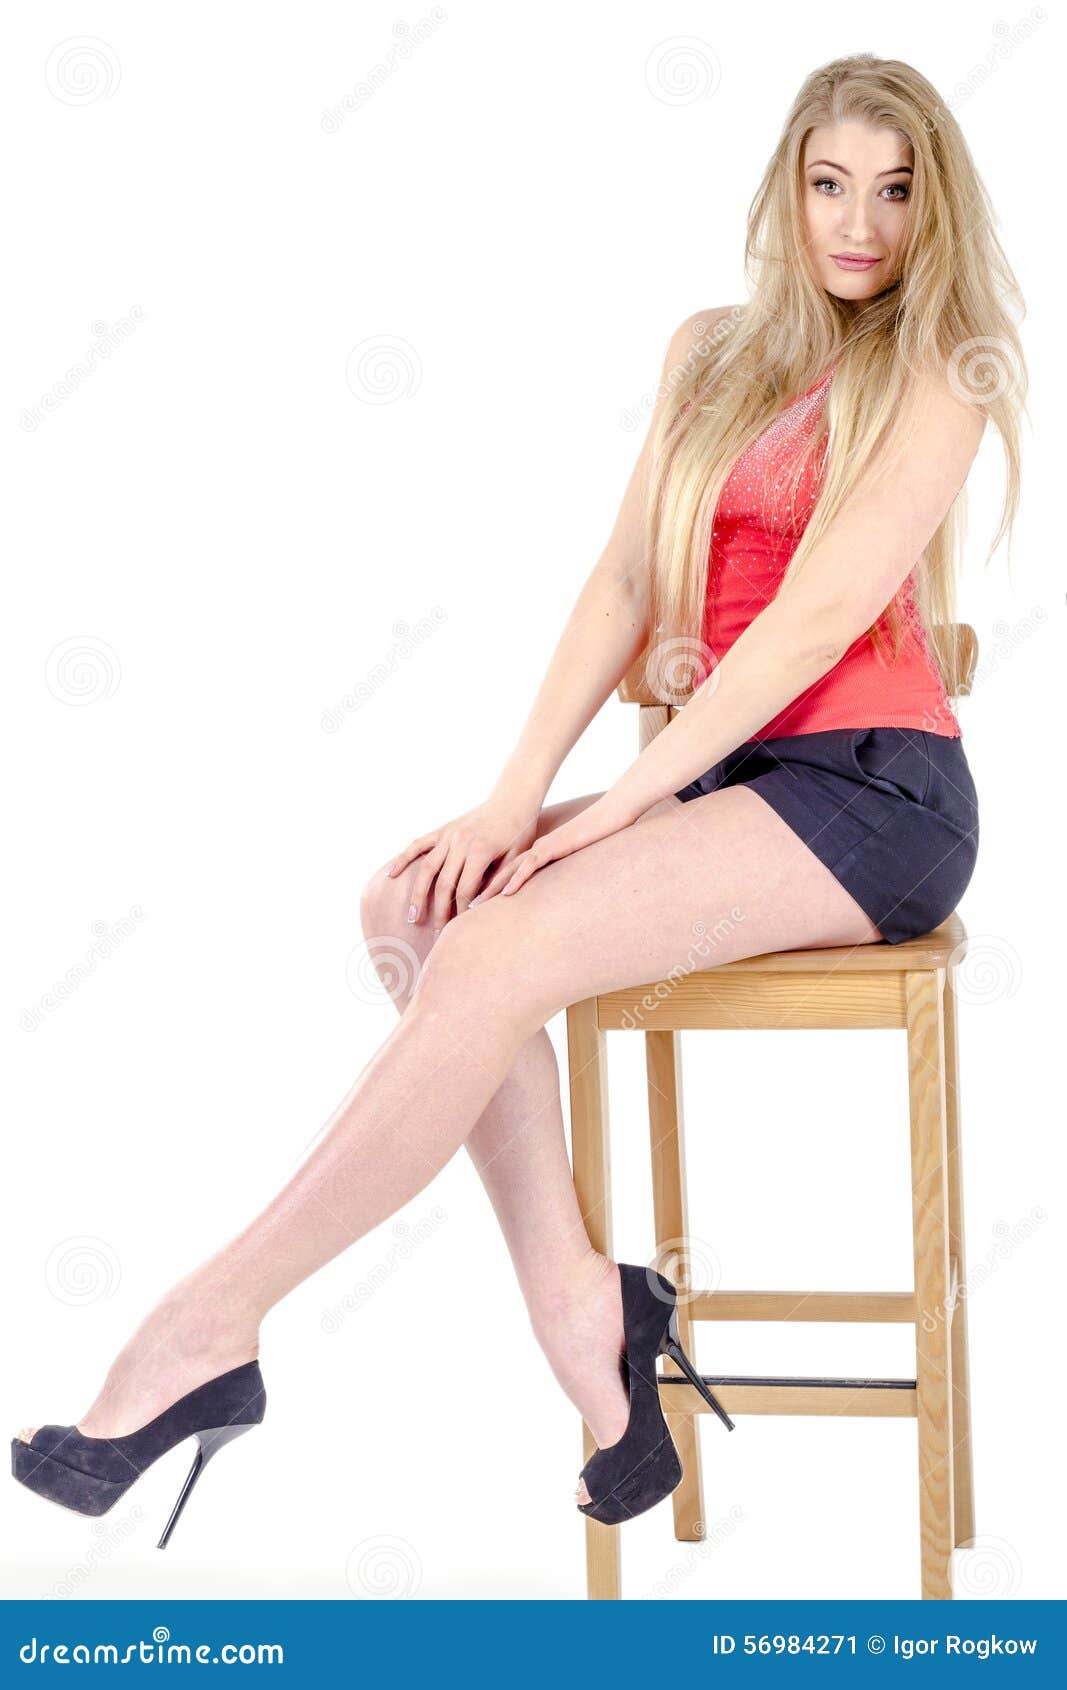 Mini skirt teen gallery 510 Beautiful Girl Mini Skirt Outdoors Photos Free Royalty Free Stock Photos From Dreamstime